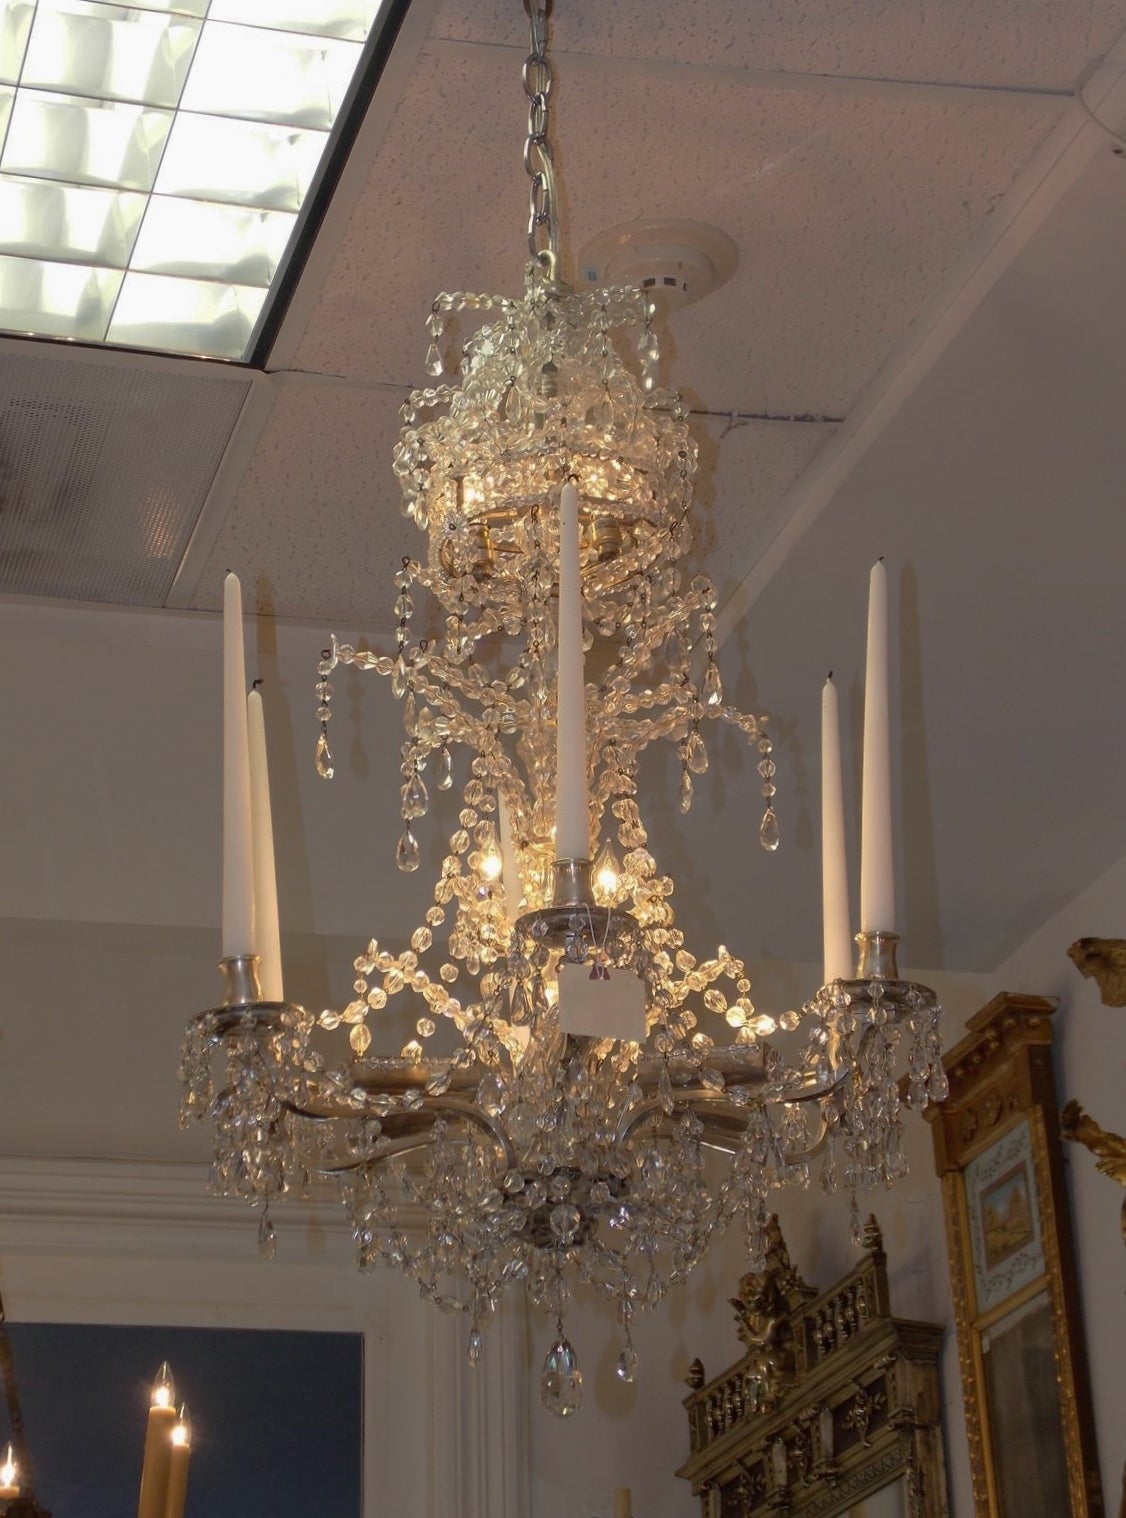 French  silver gilt nickel and bronze crystal chandelier with six candle arms, electrified crystal central column, six fitted interior lights, and intertwined crystal bead work. Late 18th century. Candle arms can be electrified at no additional cost